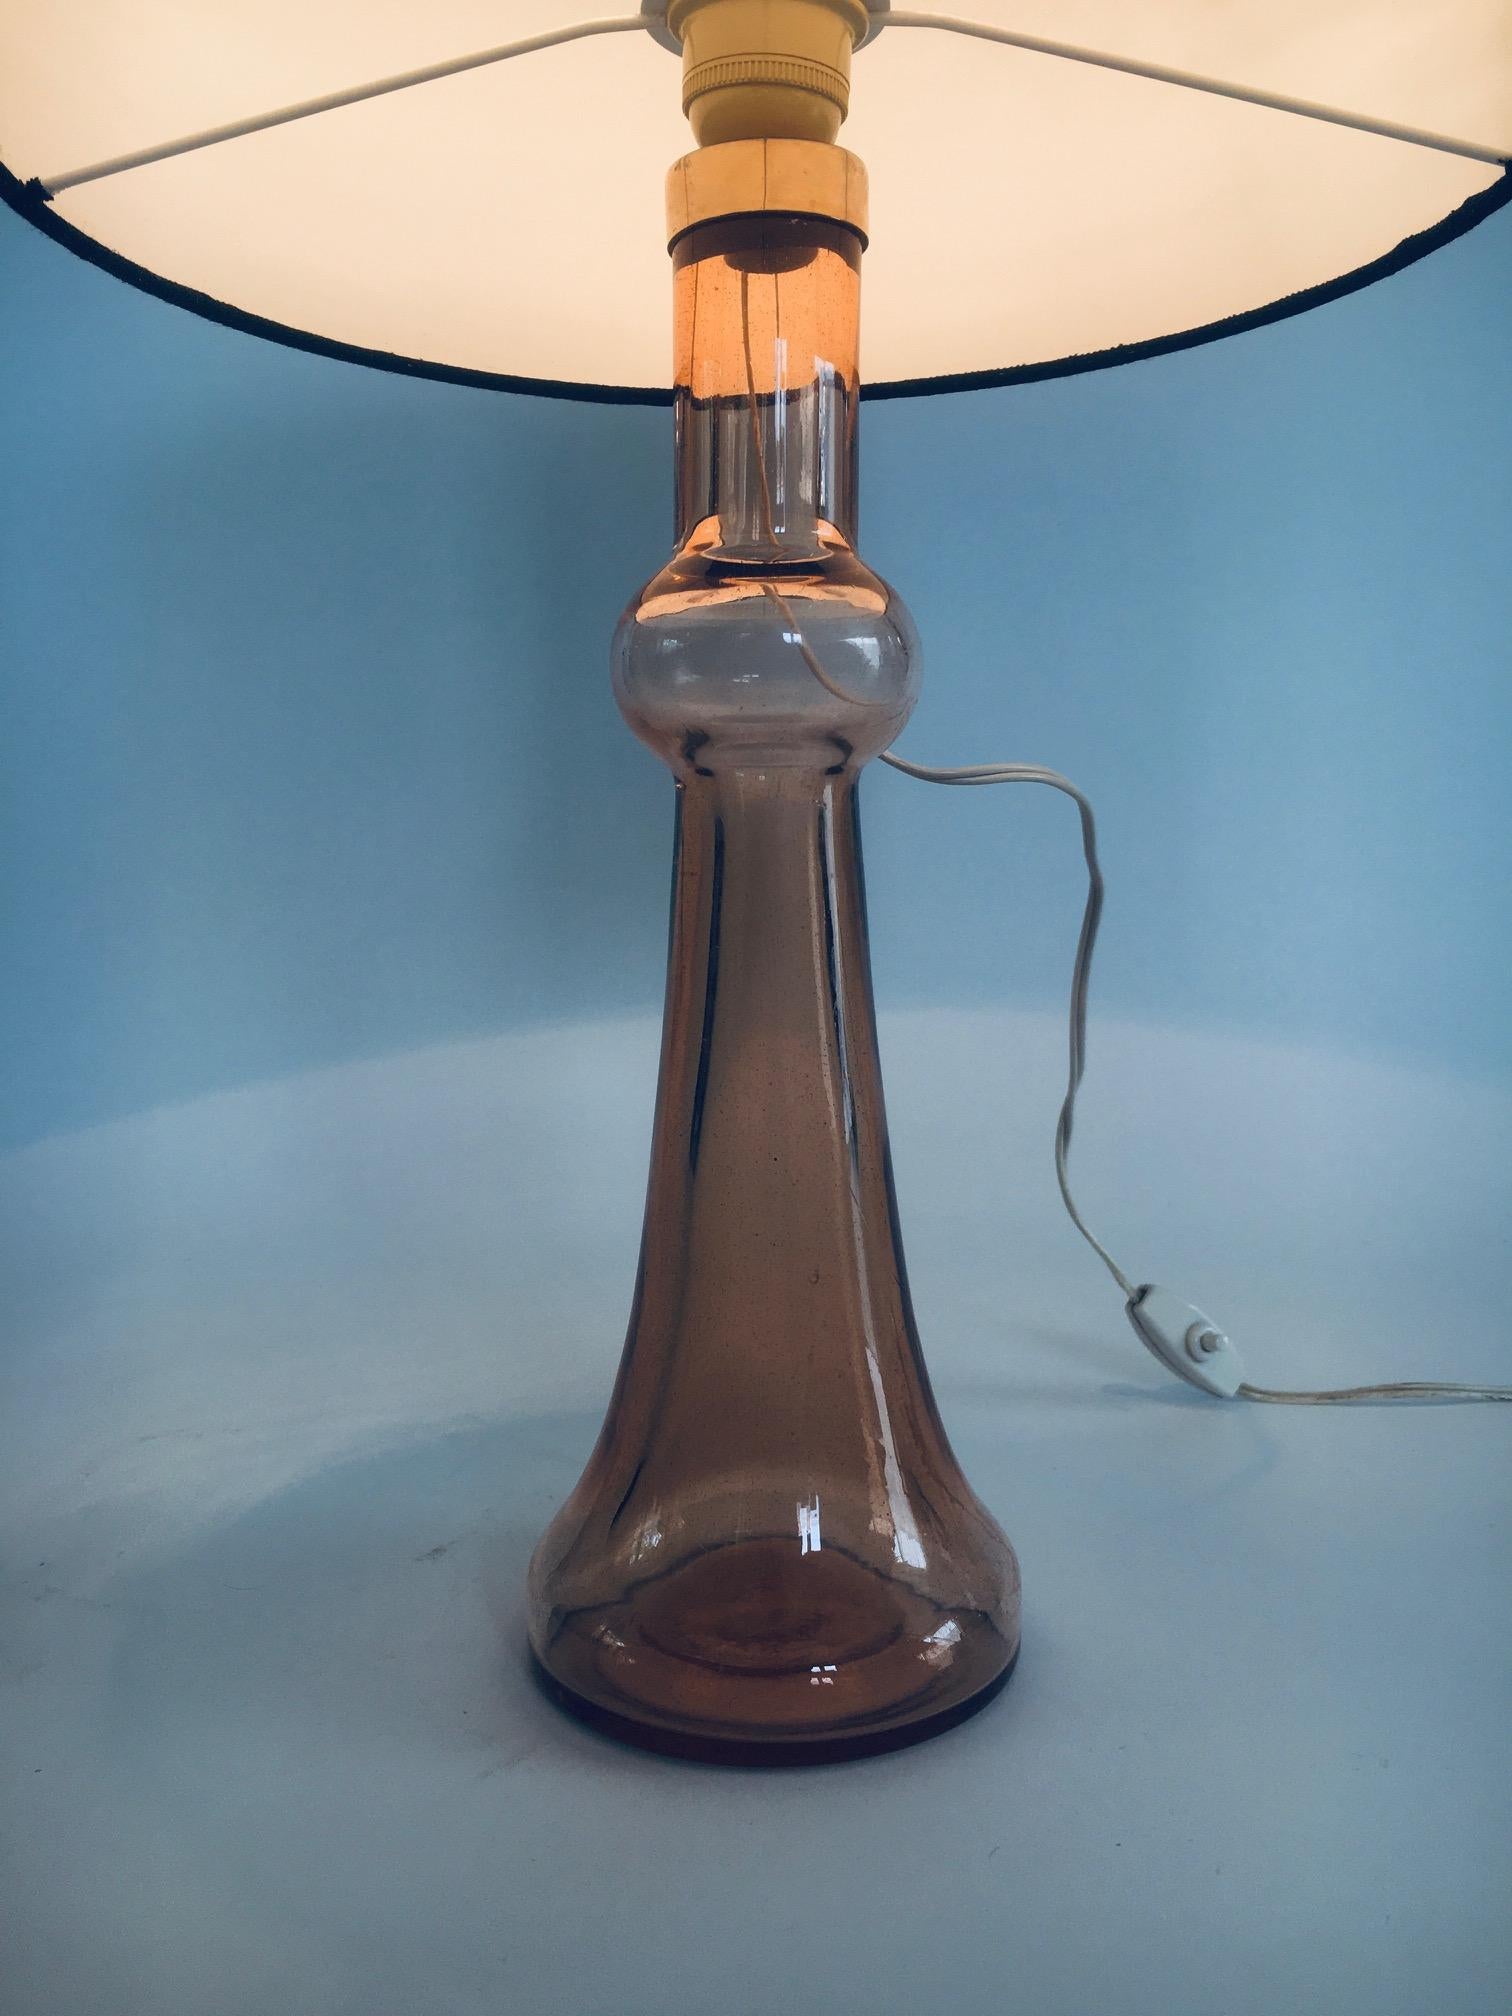 Midcentury Design Glass Table Lamp Set by Nanny Still for Raak, Netherlands 1960 For Sale 11